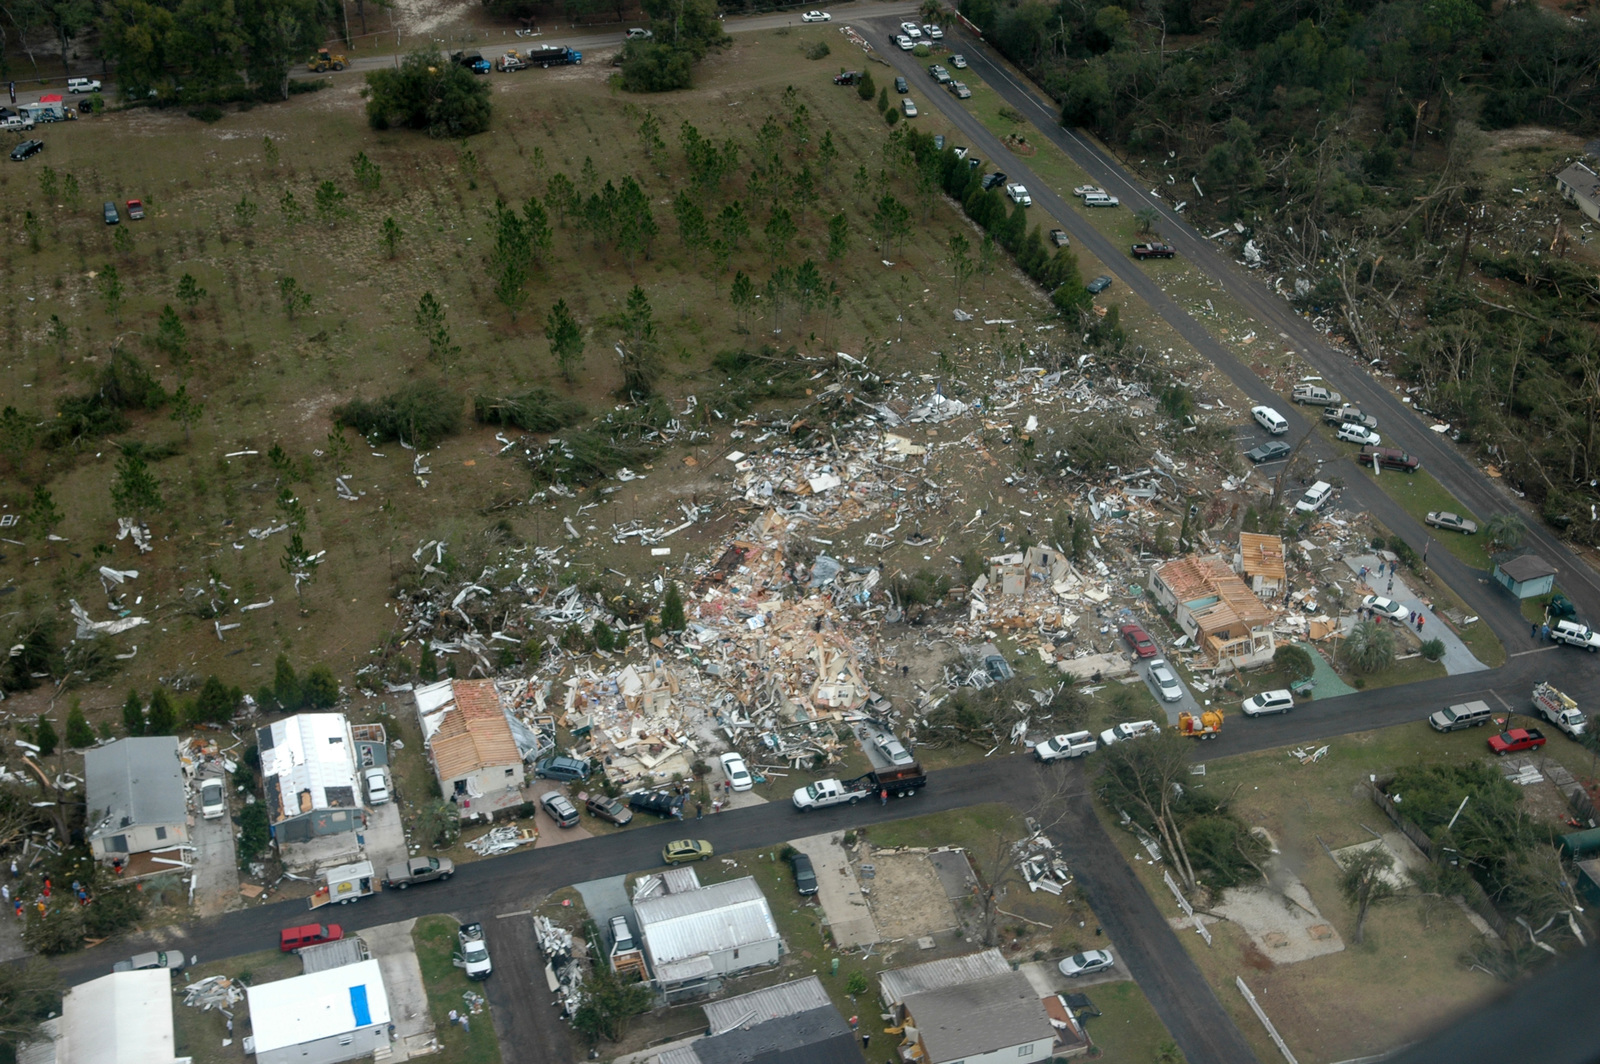 Aftermath of Tornado in Central Florda. Source: NARA